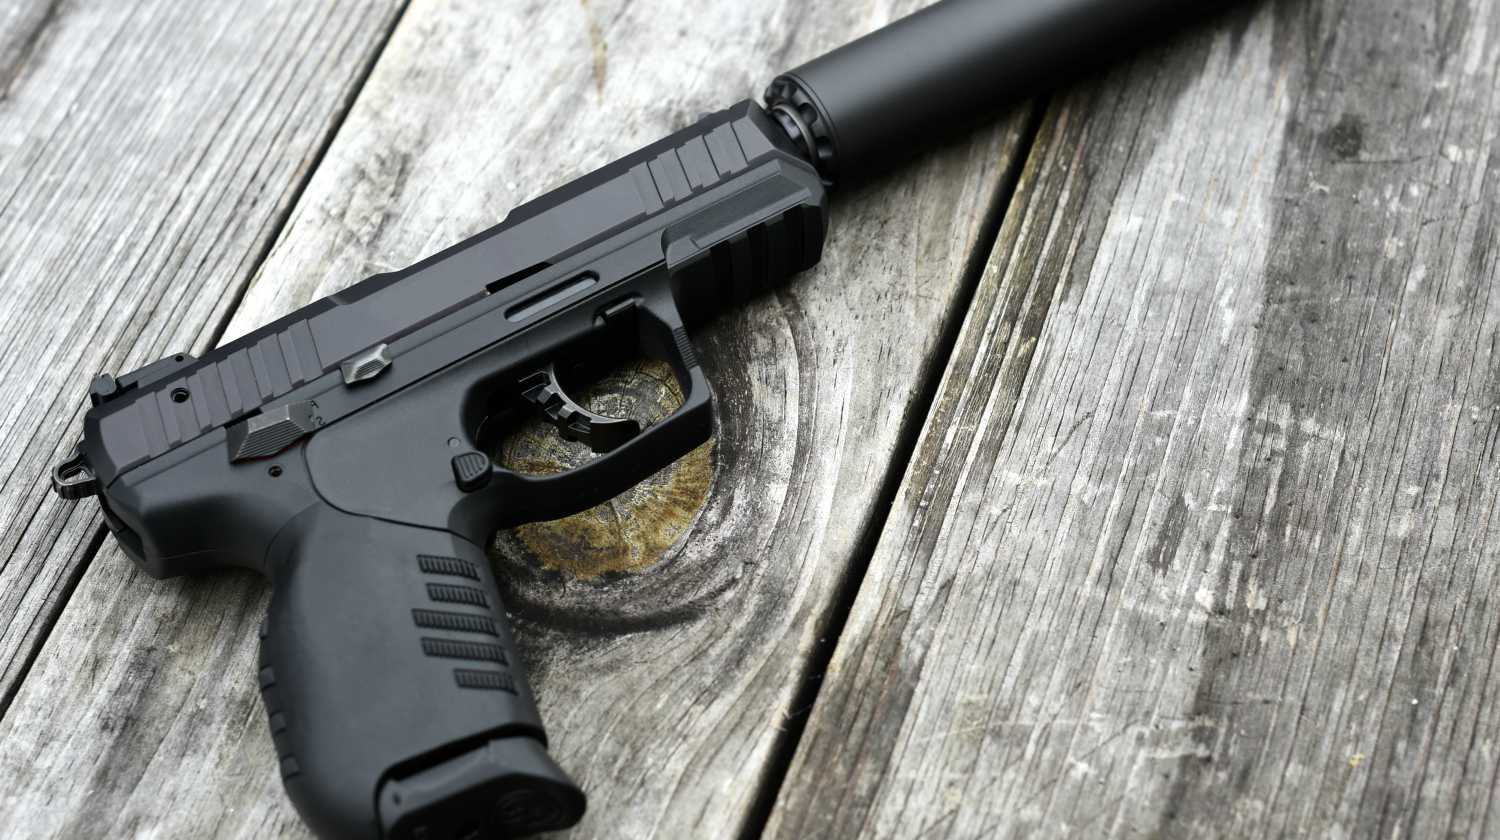 Feature | Black Handgun with silencer | Pistol Modifications You Need To Avoid | Gun Carrier